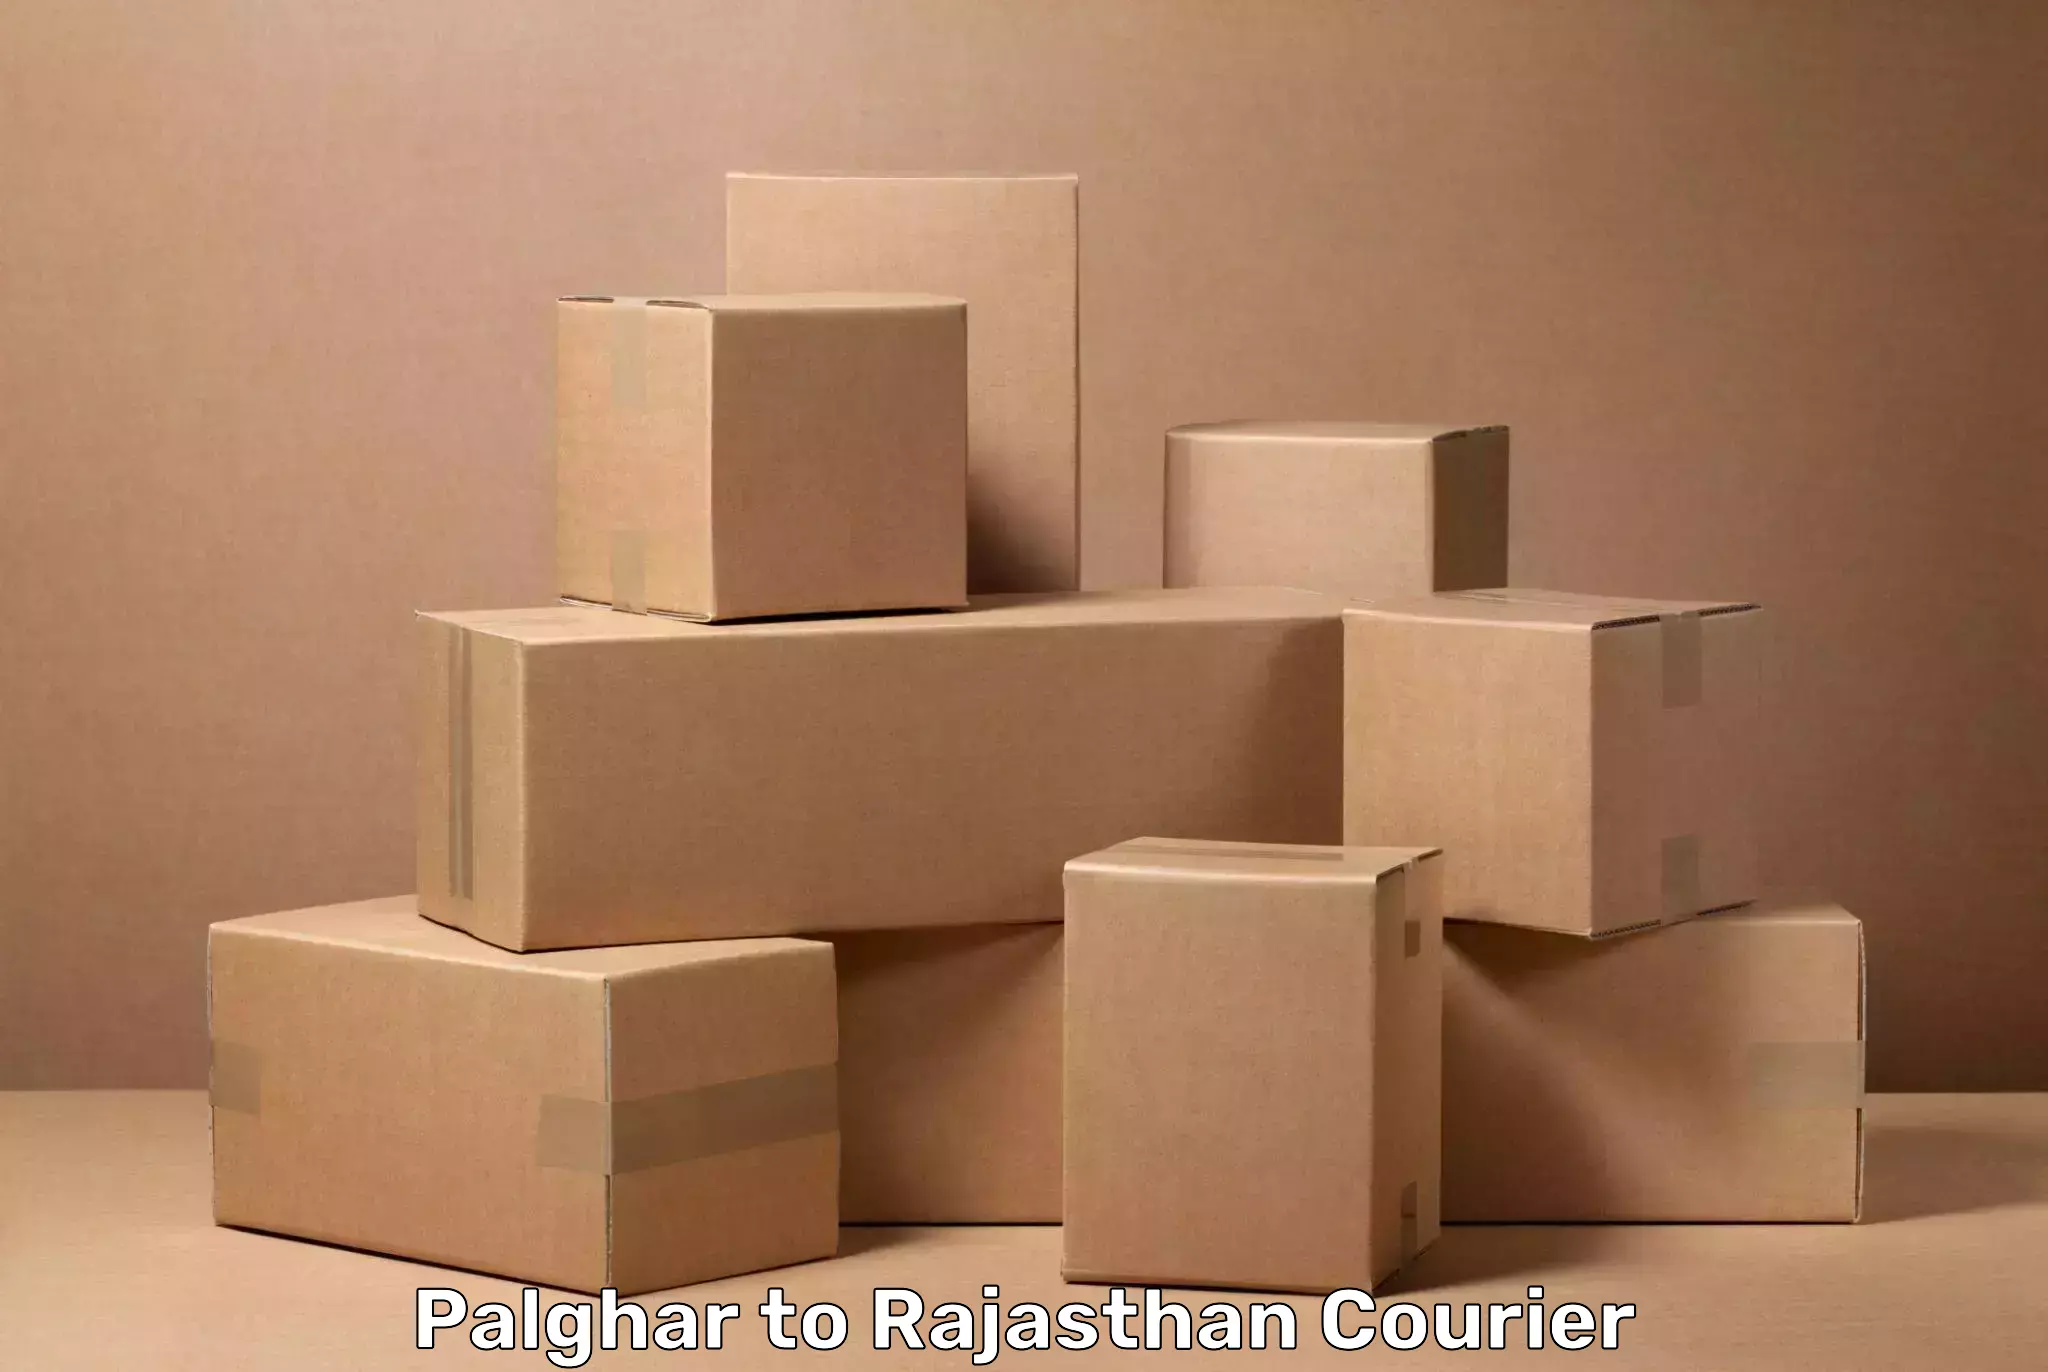 Luggage delivery app Palghar to Rajasthan